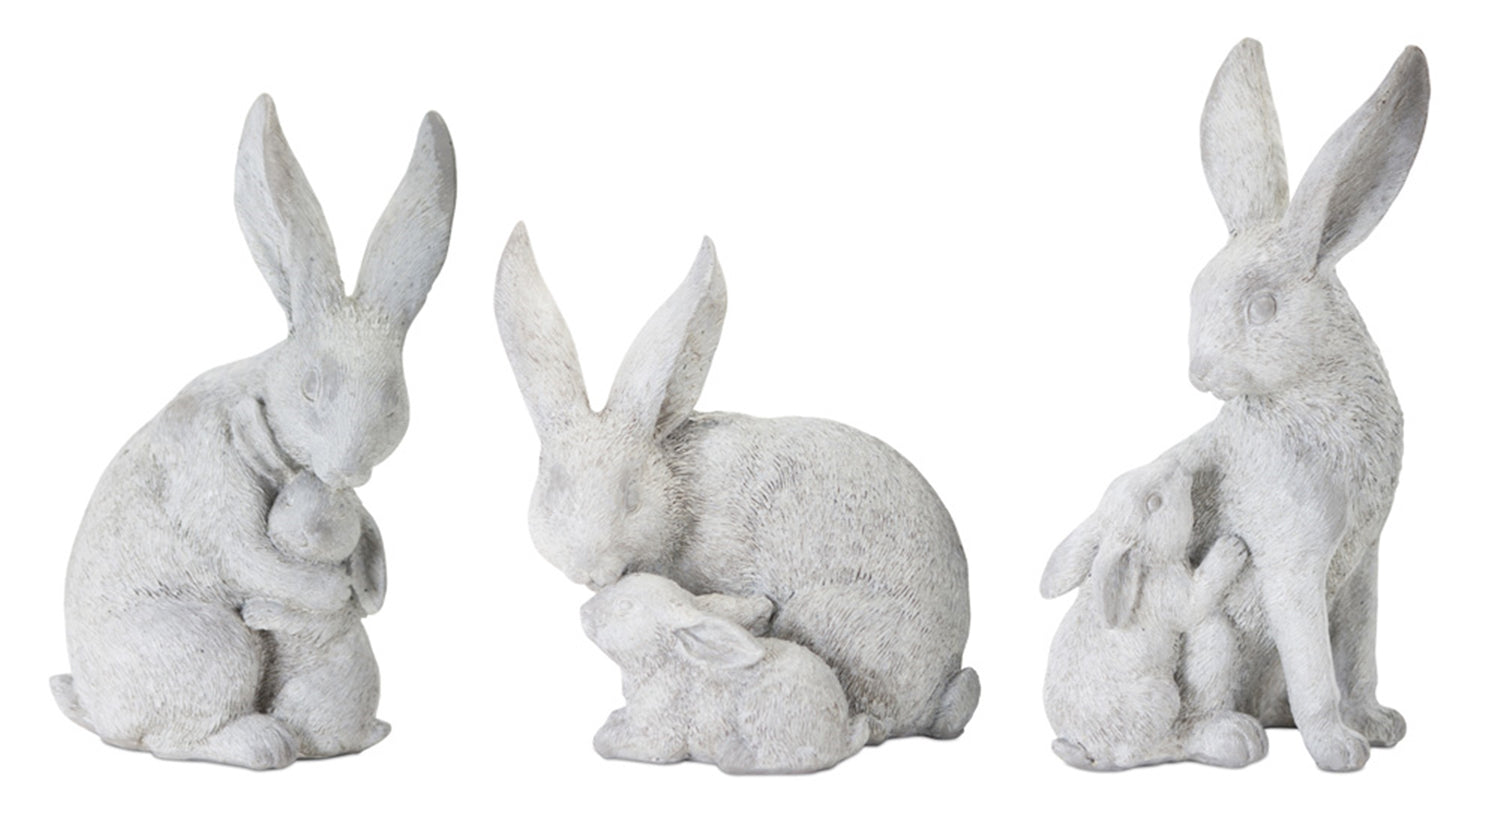 Rabbit With Bunny (Set of 6) 4.5"H, 5.5"H, 6"H Resin/Stone Powder